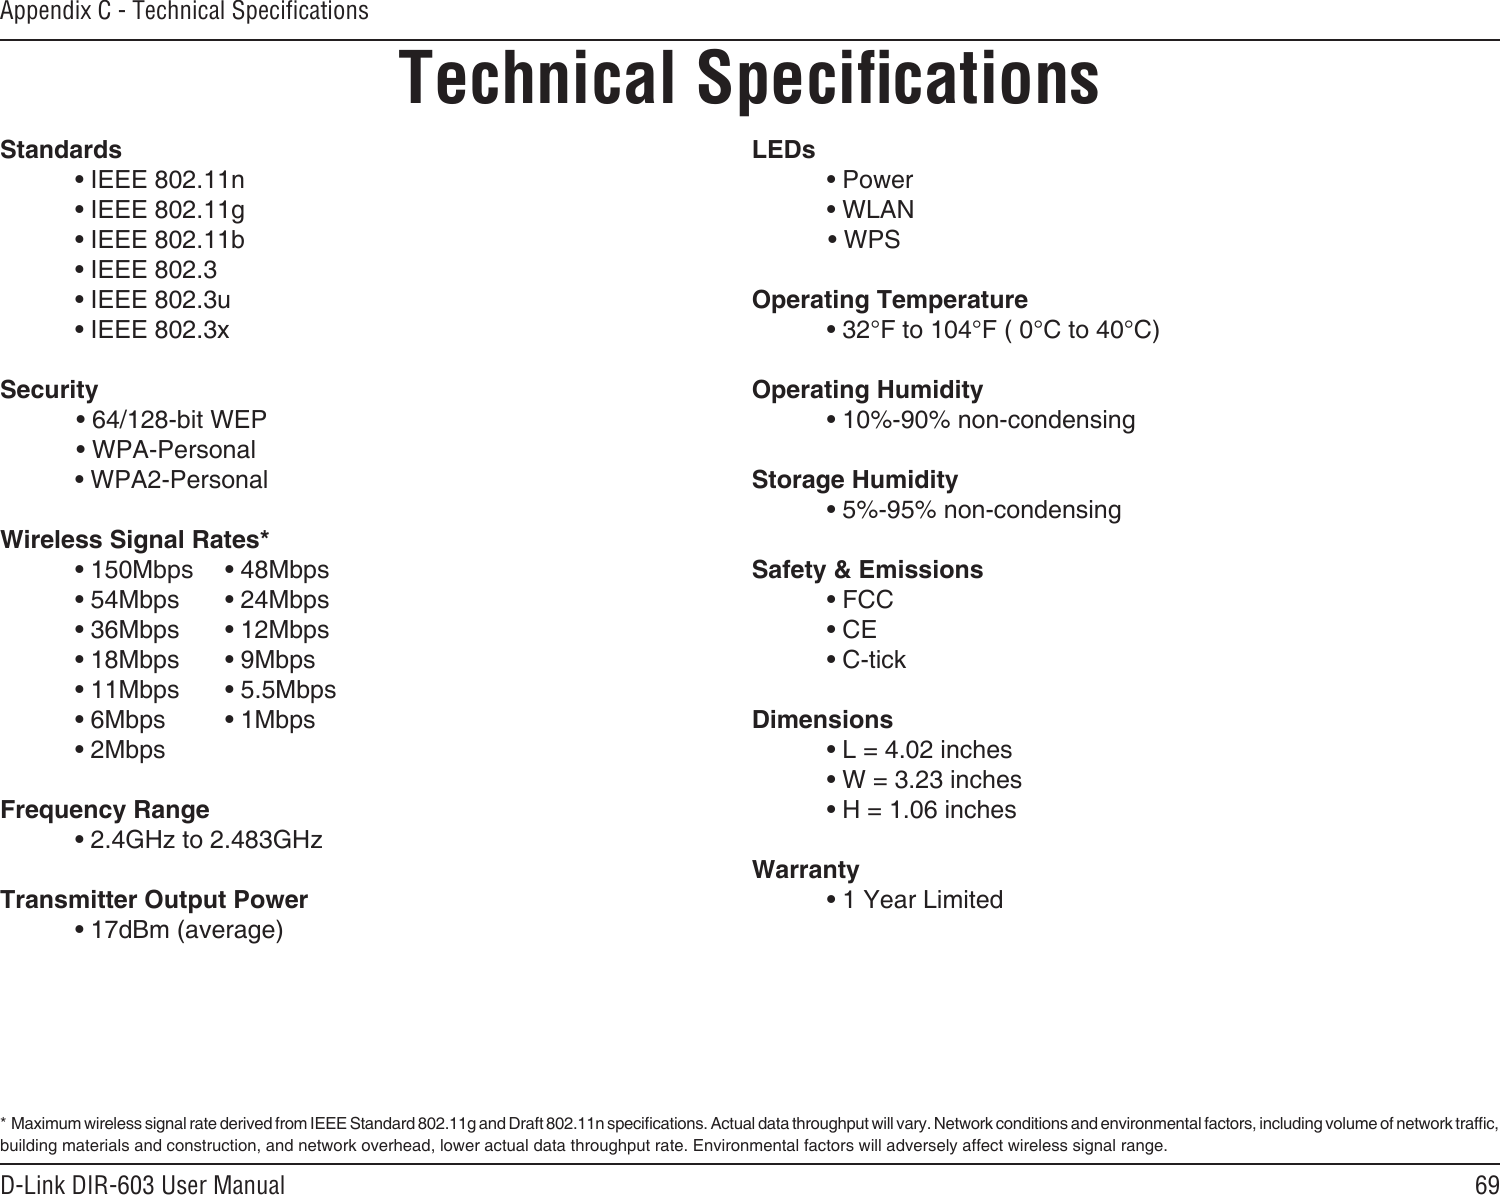 69D-Link DIR-603 User ManualAppendix C - Technical SpecicationsTechnical SpecicationsStandards  • IEEE 802.11n  • IEEE 802.11g  • IEEE 802.11b  • IEEE 802.3  • IEEE 802.3u  • IEEE 802.3xSecurity           • 64/128-bit WEP            • WPA-Personal  • WPA2-PersonalWireless Signal Rates* • 150Mbps   • 48Mbps  • 54Mbps   • 24Mbps  • 36Mbps  • 12Mbps  • 18Mbps   • 9Mbps  • 11Mbps   • 5.5Mbps  • 6Mbps   • 1Mbps  • 2Mbps      Frequency Range  • 2.4GHz to 2.483GHzTransmitter Output Power  • 17dBm (average)LEDs  • Power        • WLAN             • WPS    Operating Temperature  • 32°F to 104°F ( 0°C to 40°C)Operating Humidity  • 10%-90% non-condensingStorage Humidity  • 5%-95% non-condensingSafety &amp; Emissions  • FCC  • CE  • C-tickDimensions  • L = 4.02 inches  • W = 3.23 inches  • H = 1.06 inchesWarranty  • 1 Year Limited*  Maximum wireless signal rate derived from IEEE Standard 802.11g and Draft 802.11n specications. Actual data throughput will vary. Network conditions and environmental factors, including volume of network trafc, building materials and construction, and network overhead, lower actual data throughput rate. Environmental factors will adversely affect wireless signal range.